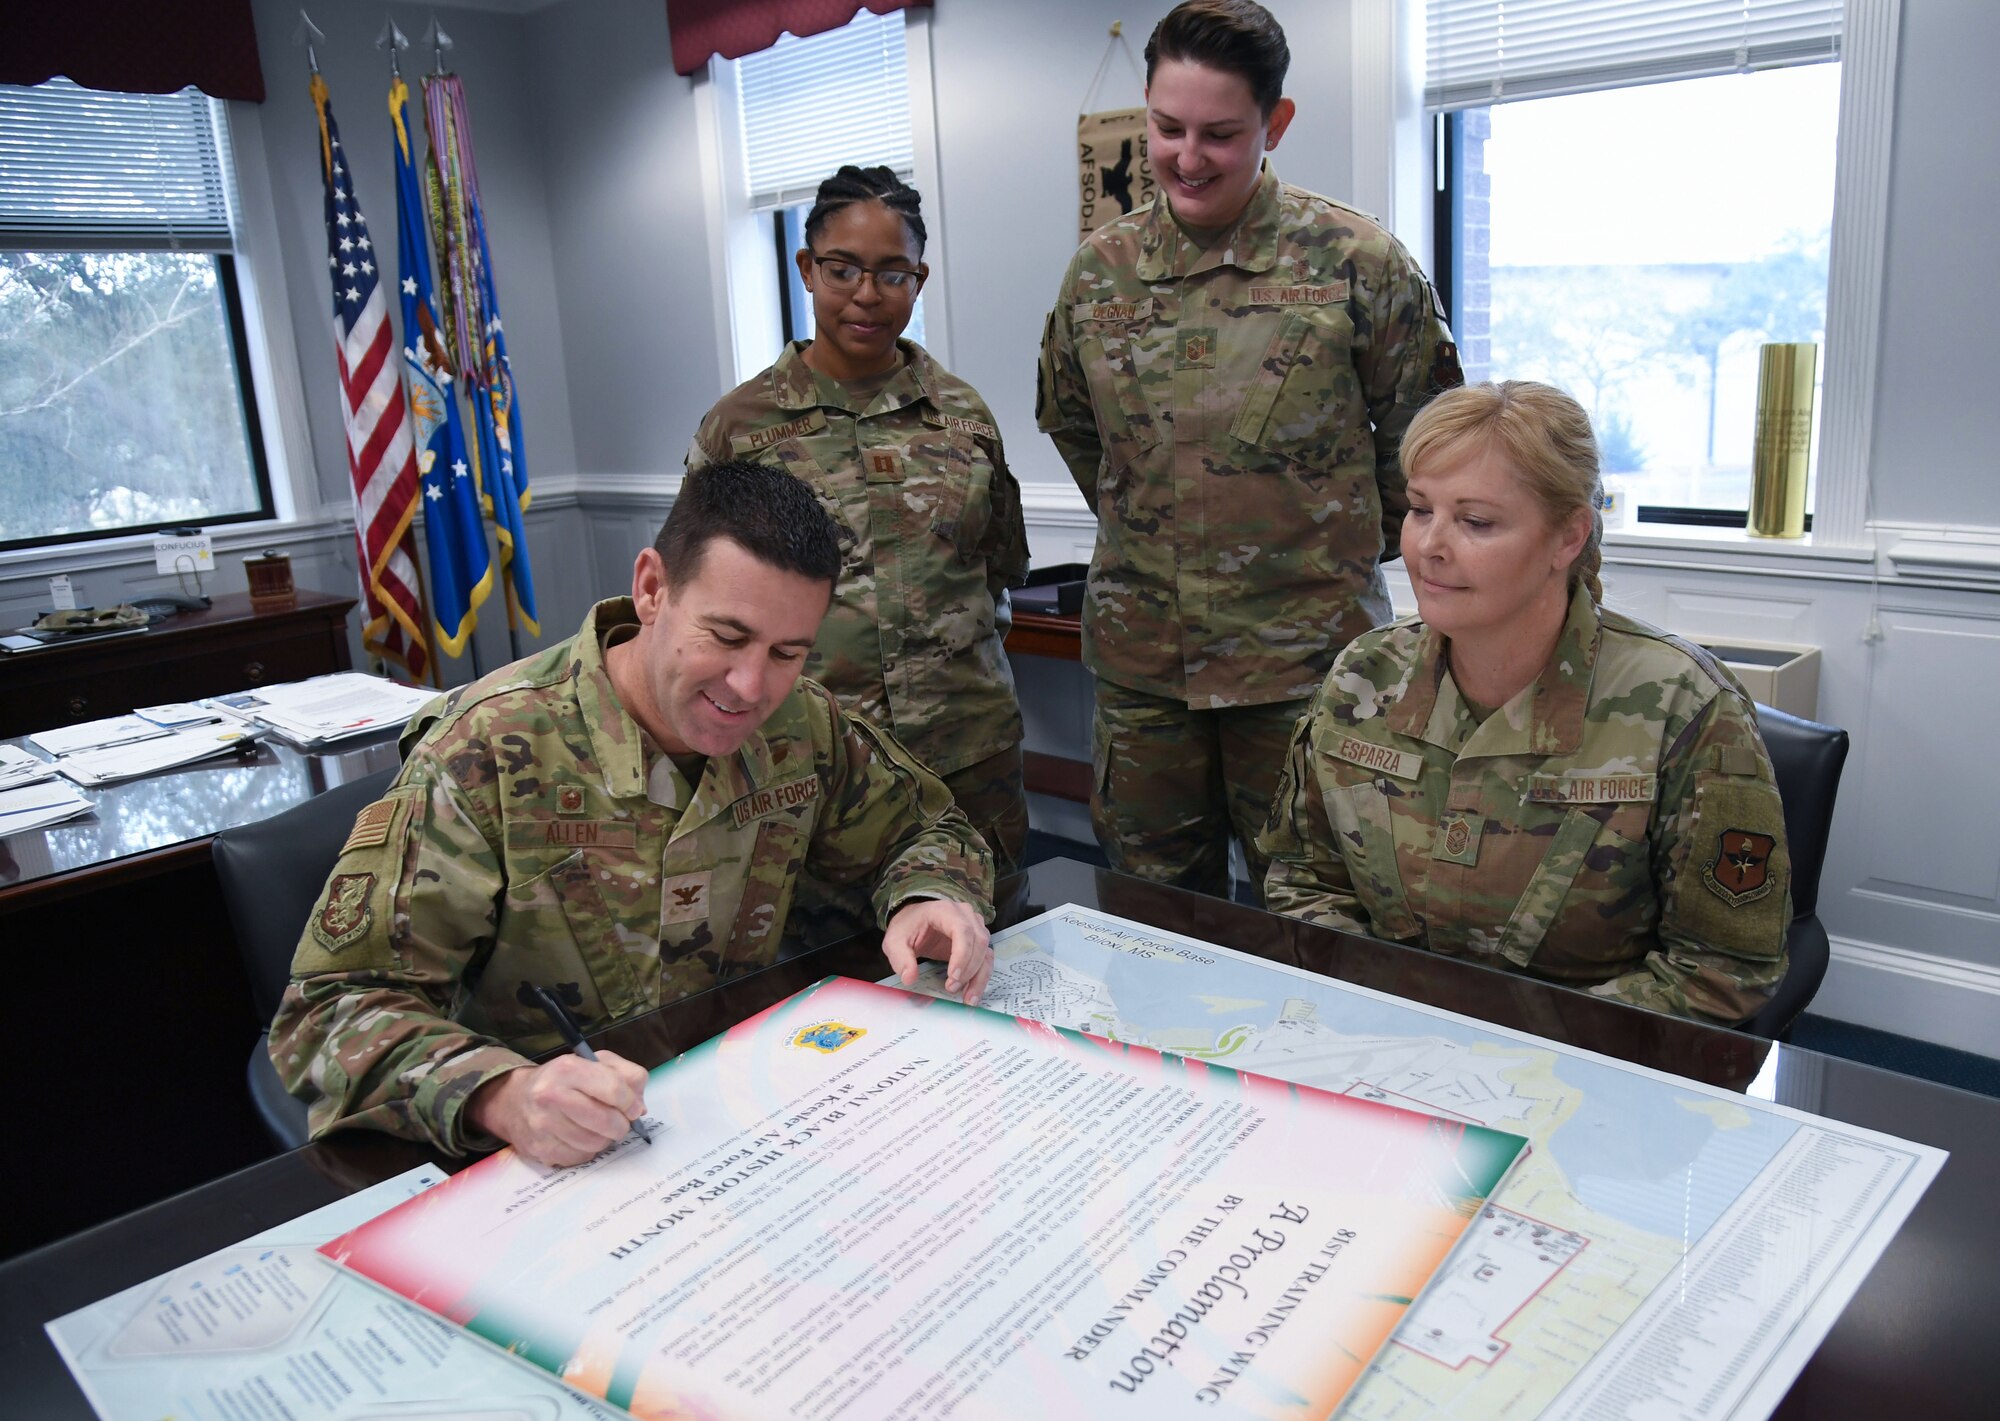 U.S. Air Force Col. Jason Allen, 81st Training Wing commander, signs the National Black History Month proclamation inside the 81st TRW headquarters building at Keesler Air Force Base, Mississippi, Jan. 2, 2023.